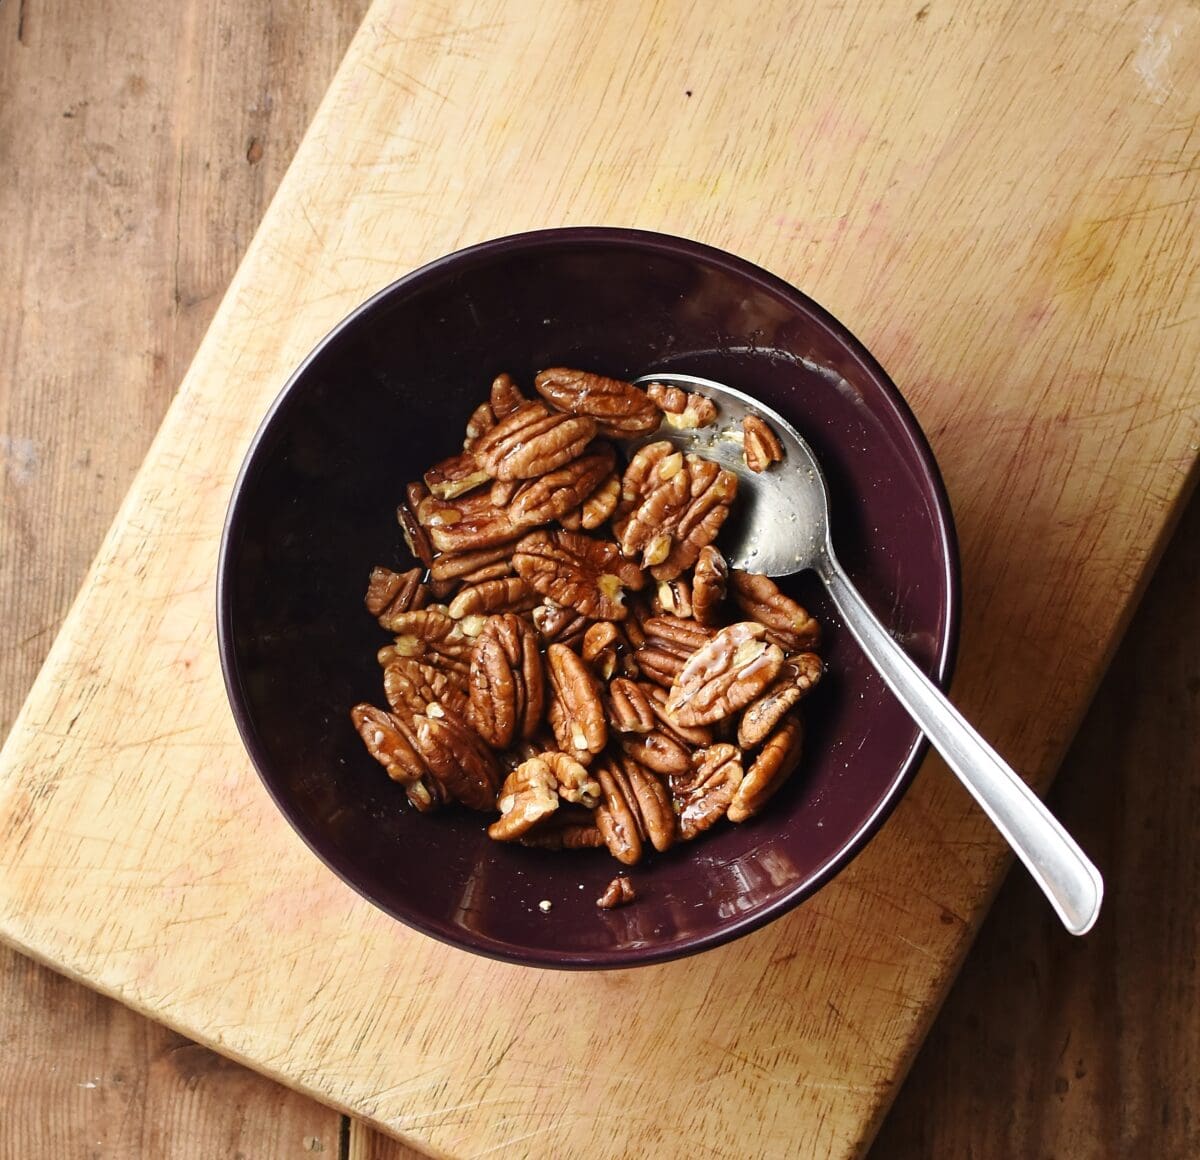 Pecans with maple glaze in purple bowl with spoon on top of wooden board.